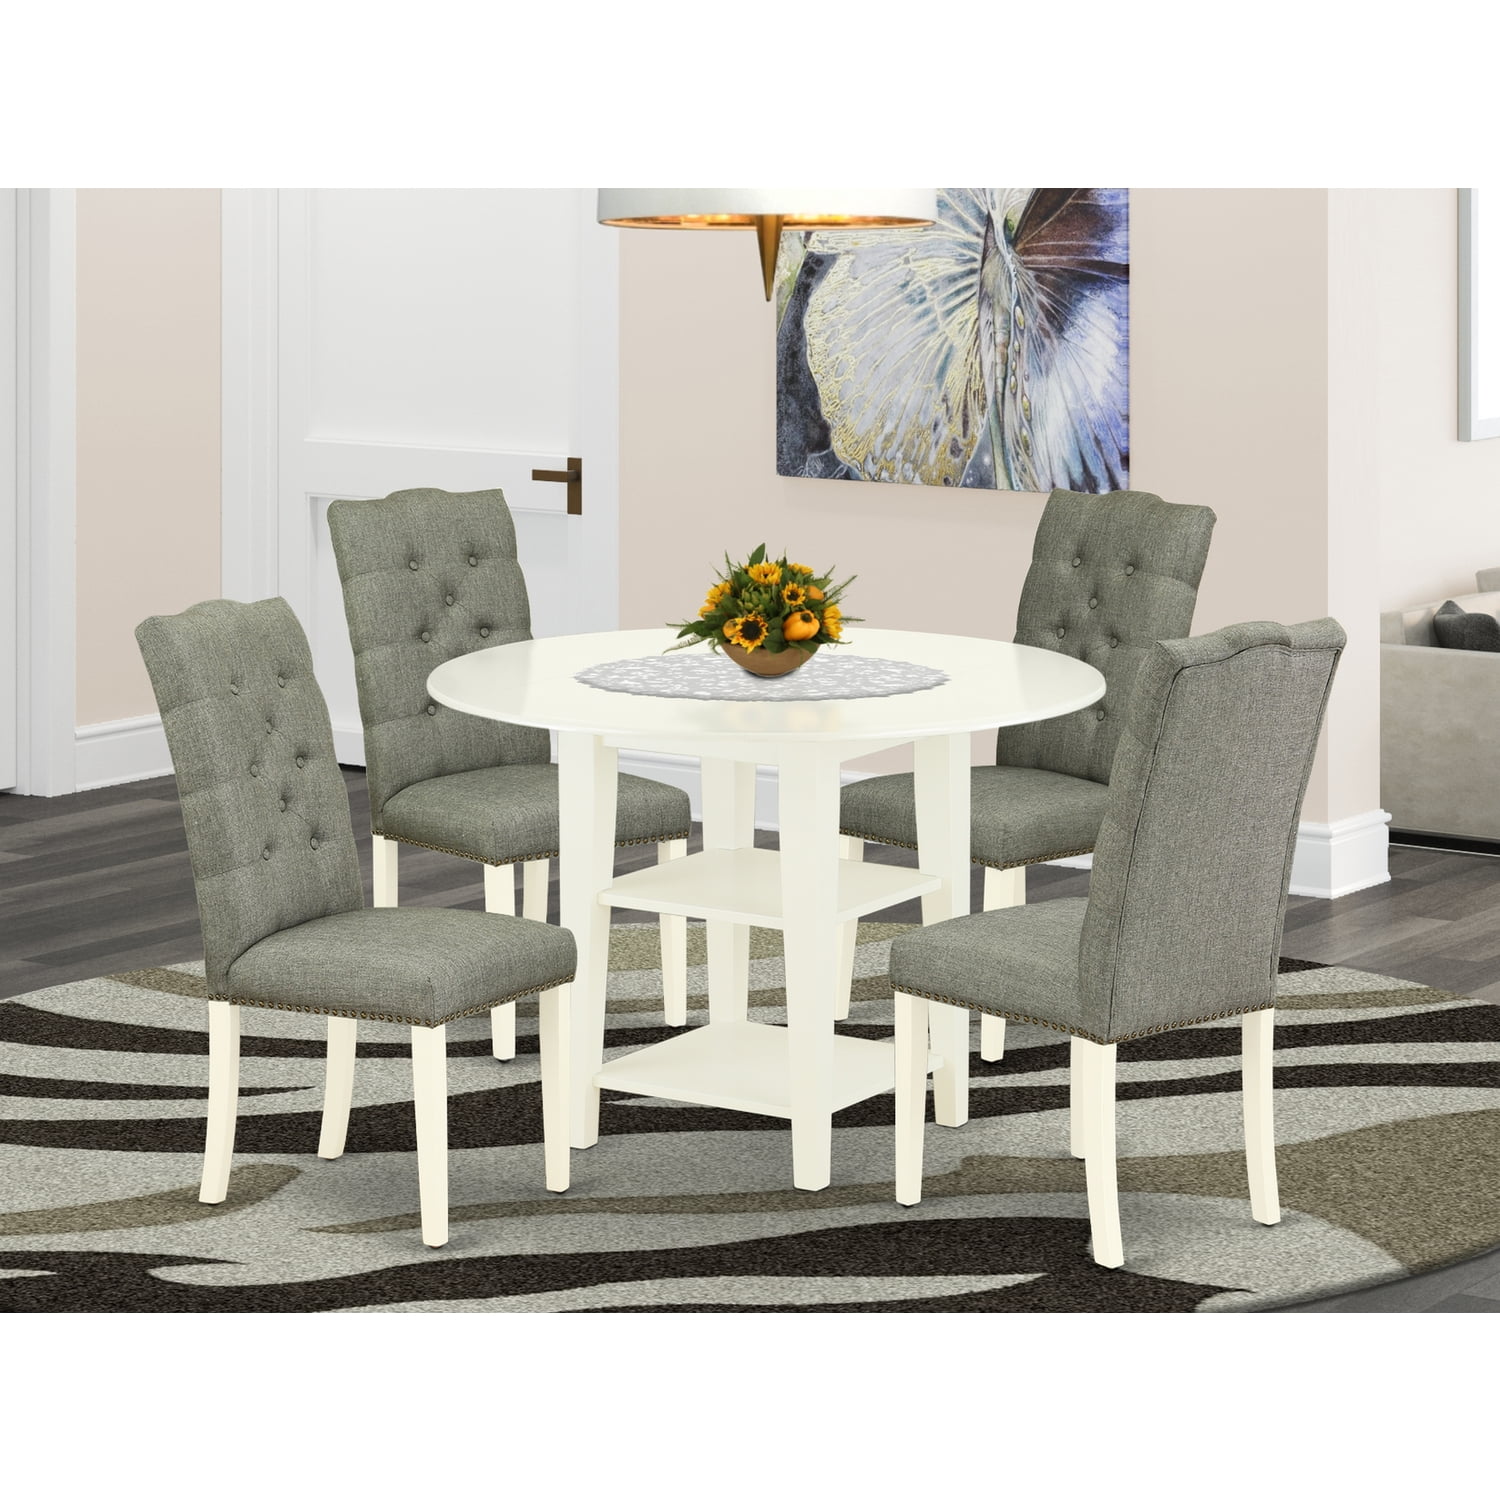 Small Round Table Solid Wood Frame, Round Dining Room Table With High Back Chairs